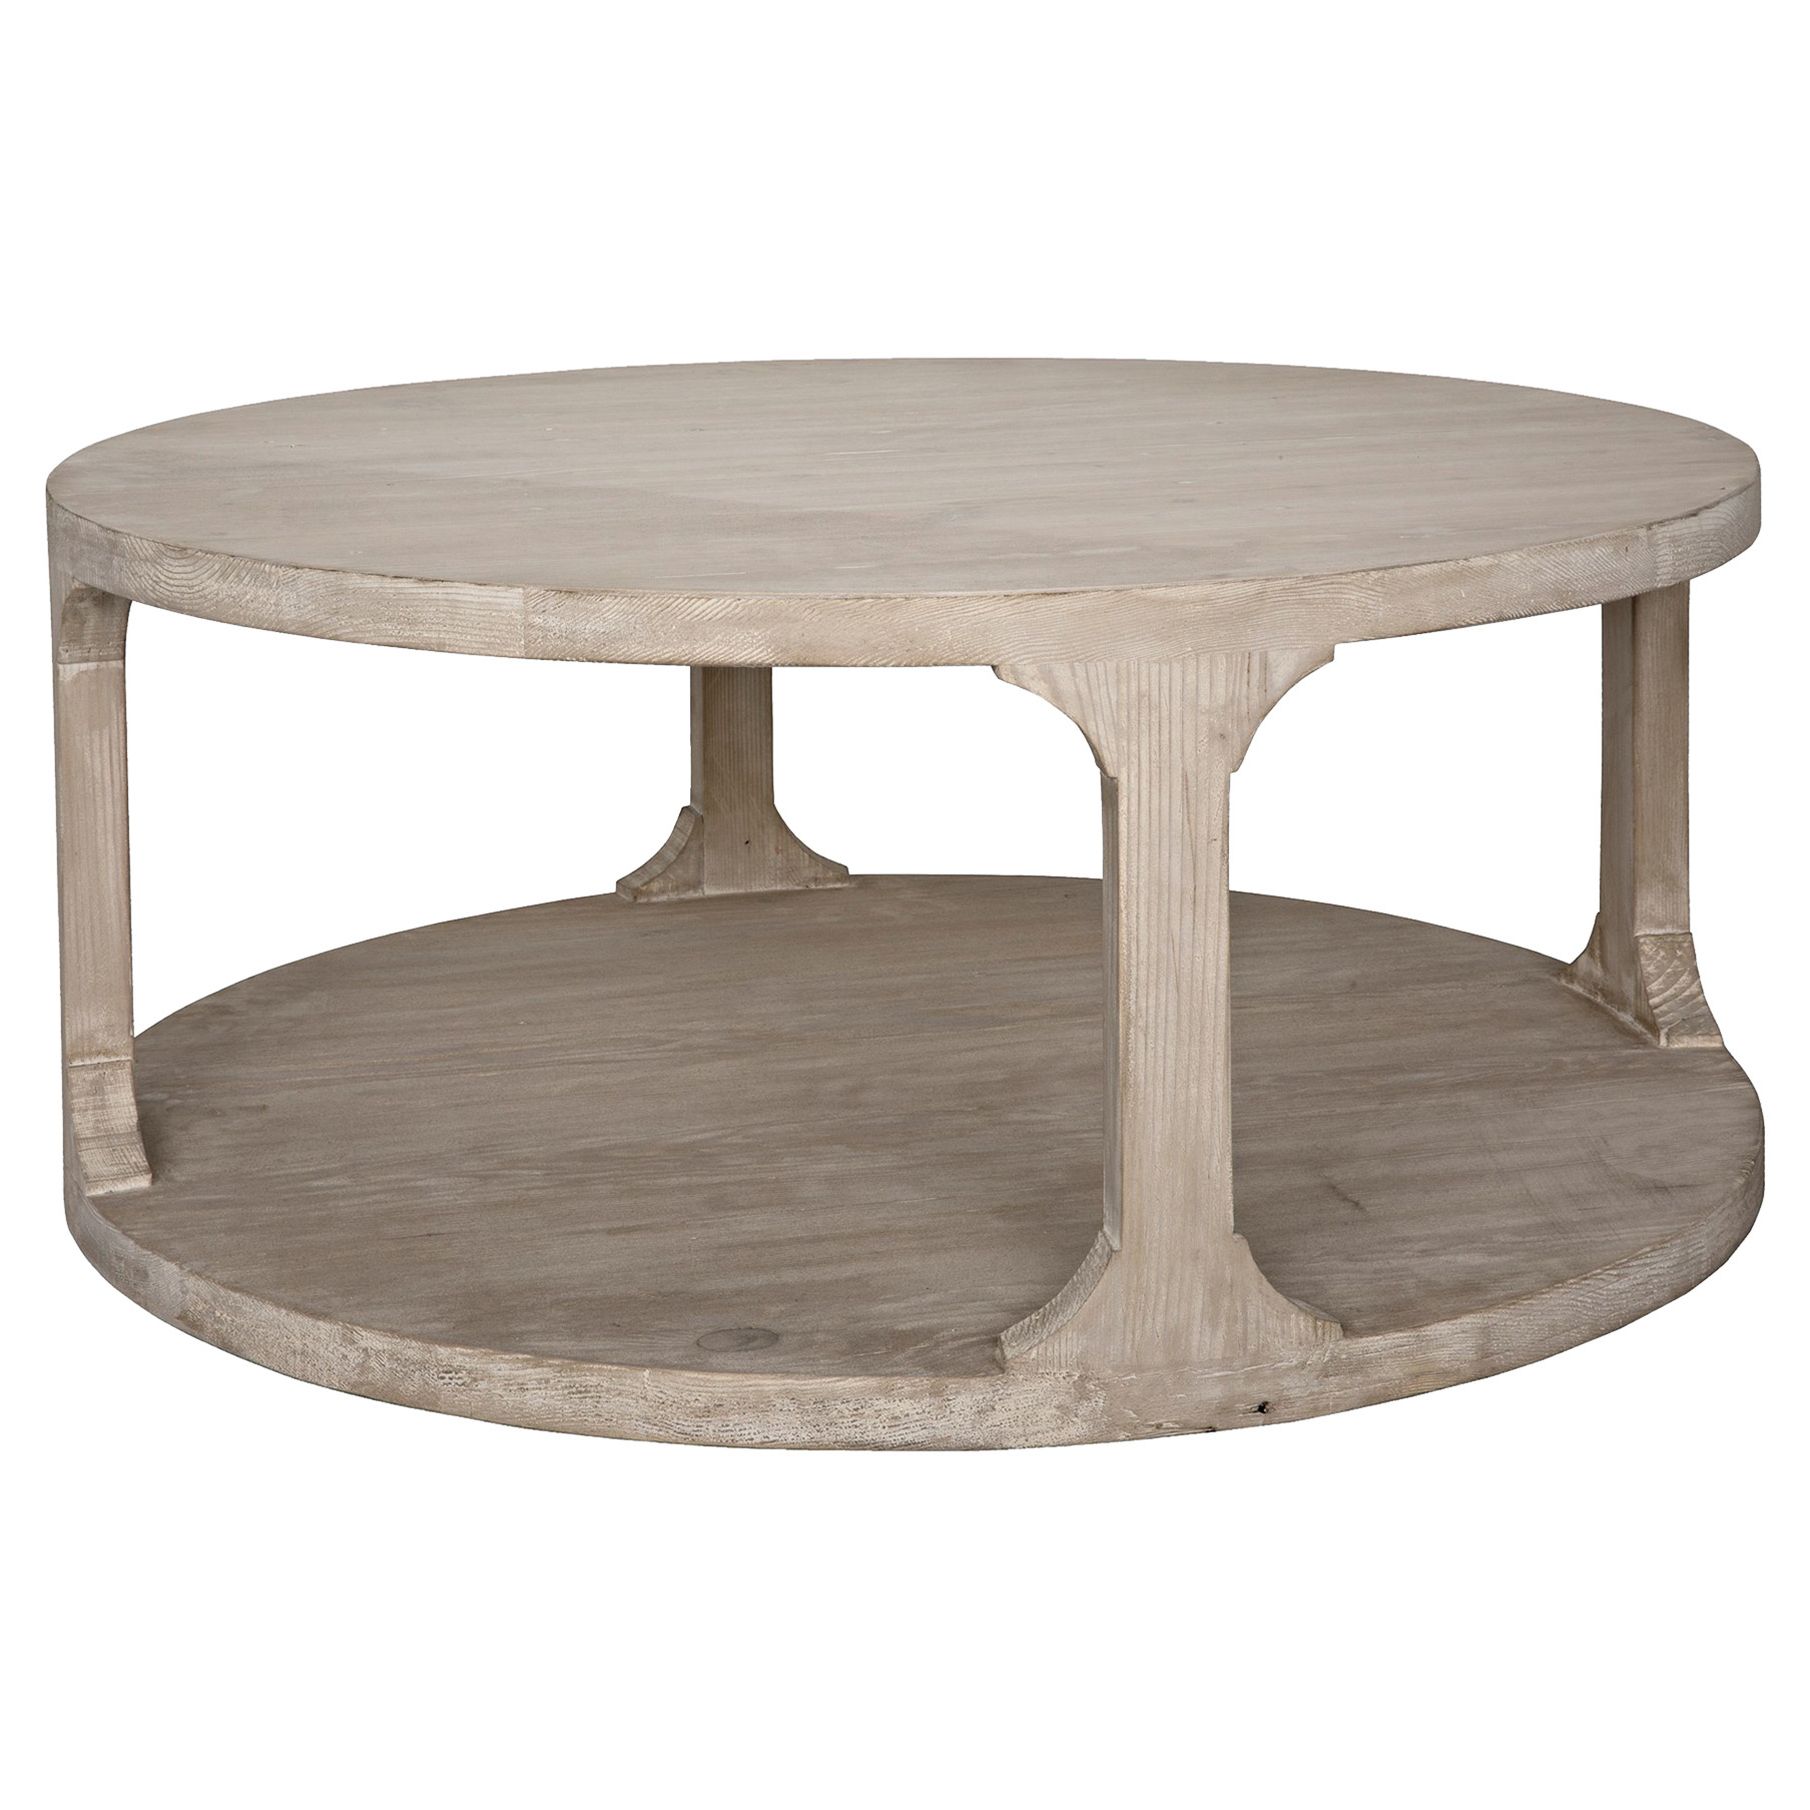 Trendy Gray Wood Black Steel Coffee Tables With Regard To Andre Coastal Beach Grey Washed Reclaimed Wood Round Coffee Table (View 2 of 10)